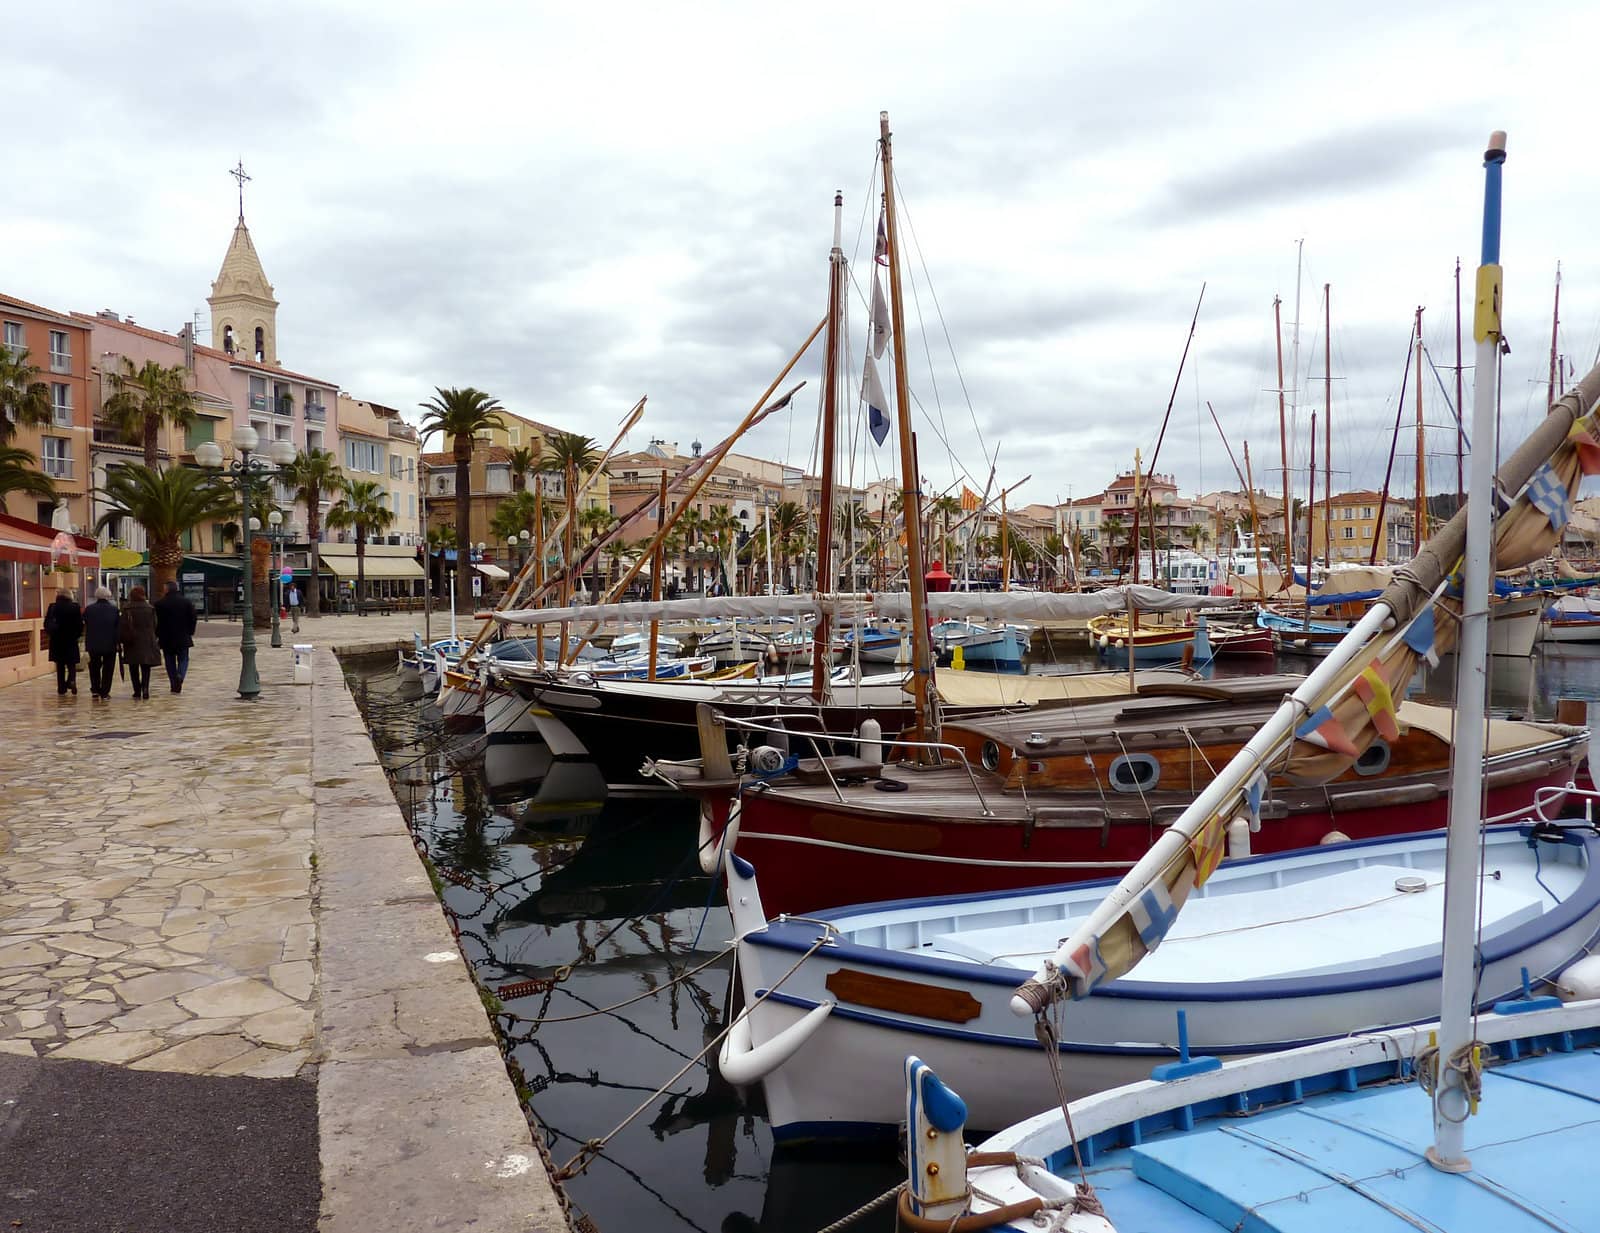 View of Sanary-sur-mer harbor with its colored boats and people walking on the side with a church, palm trees and buildings, France, by cloudy weather